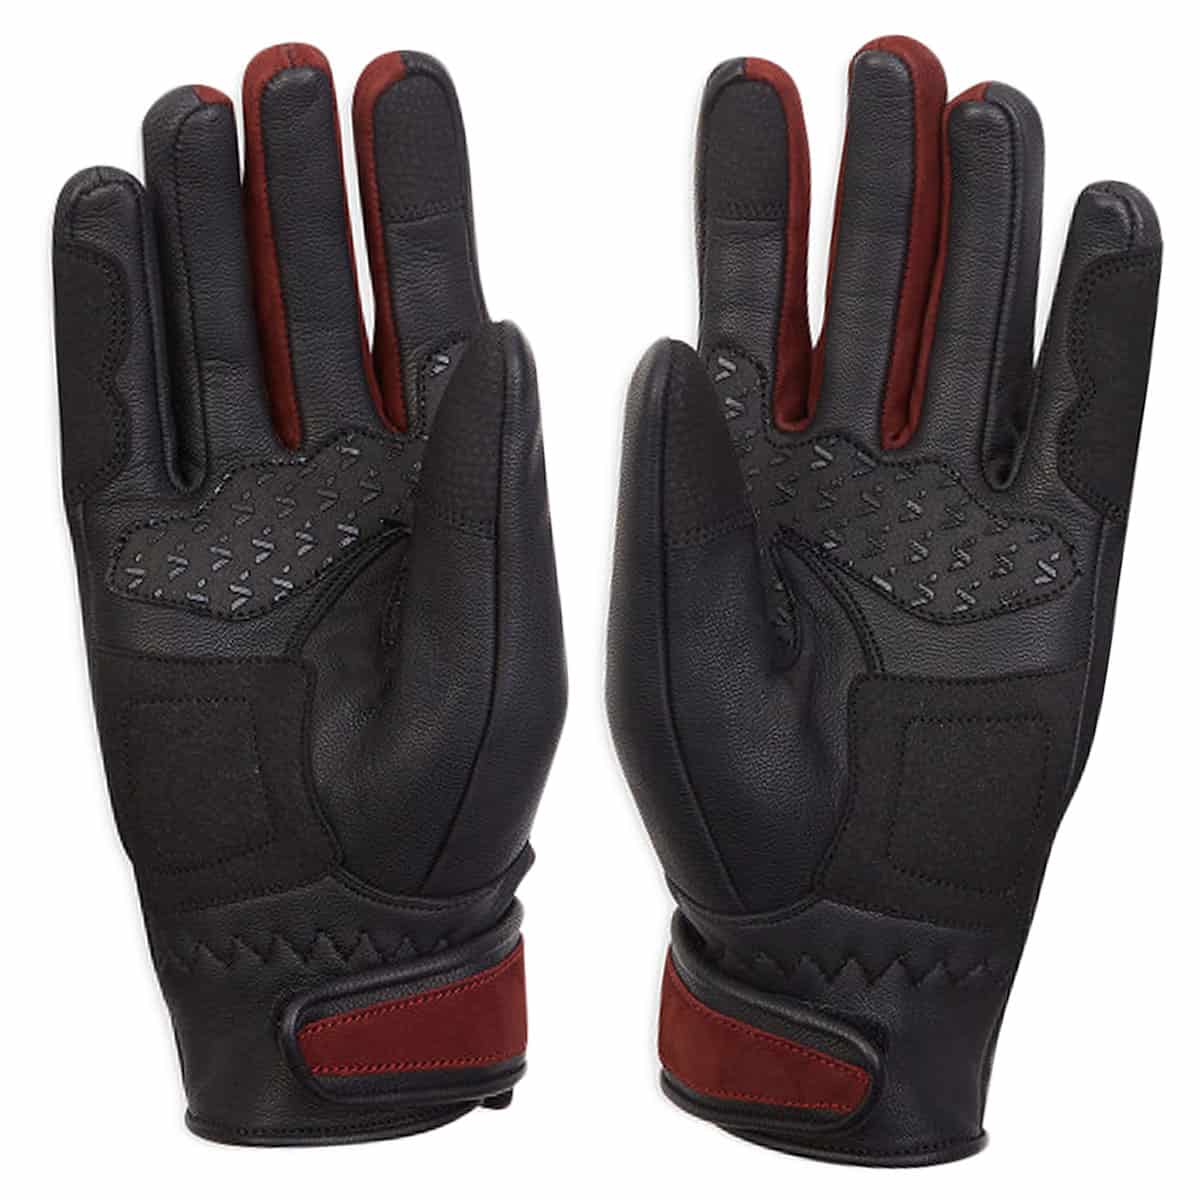 Gear up with the stylish and protective Spada Bennett CE Ladies Leather Motorcycle Gloves! These gloves are specially designed for women riders who want both safety and style